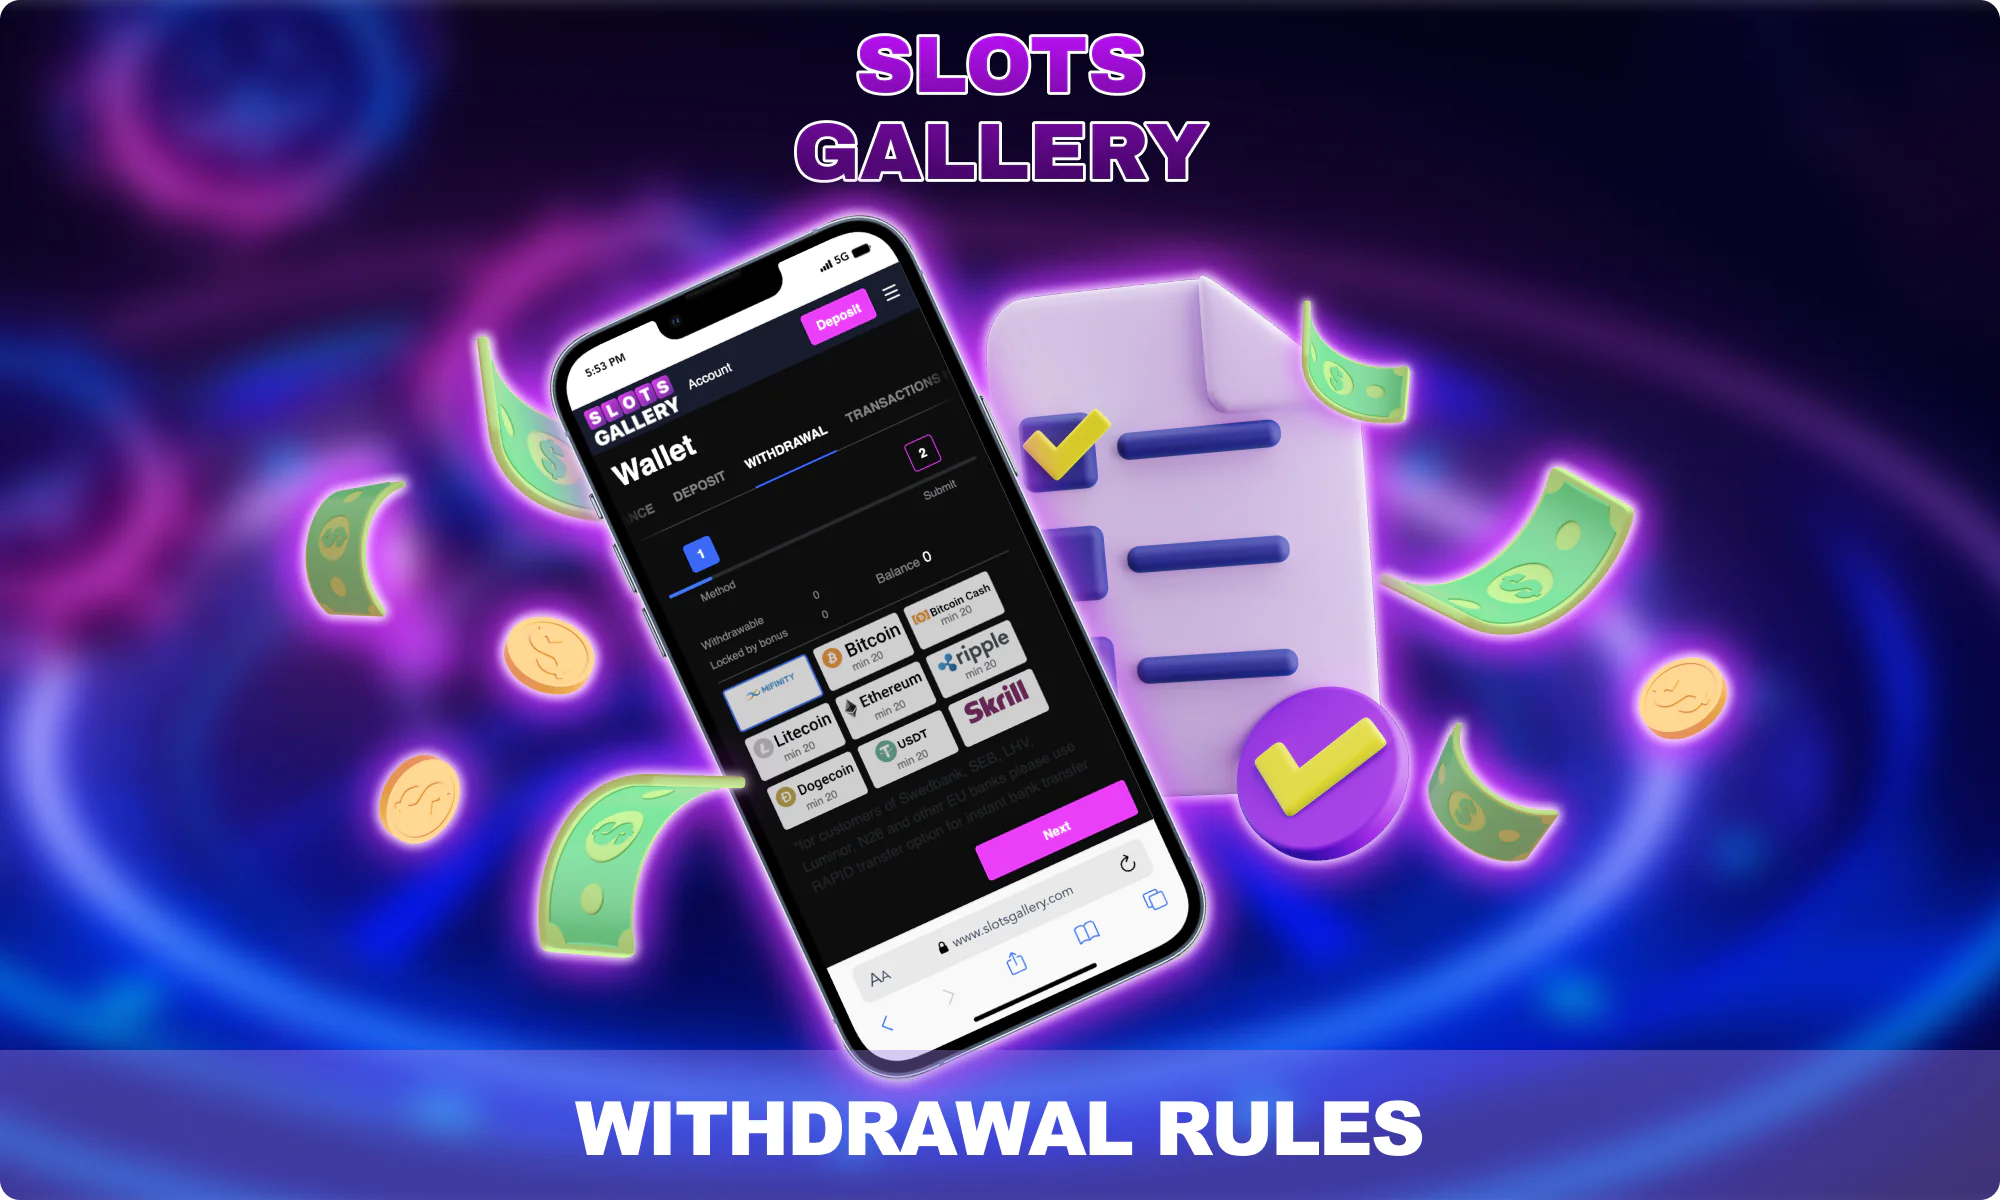 Rules that Australian players must follow to withdraw money from the Slots Gallery website